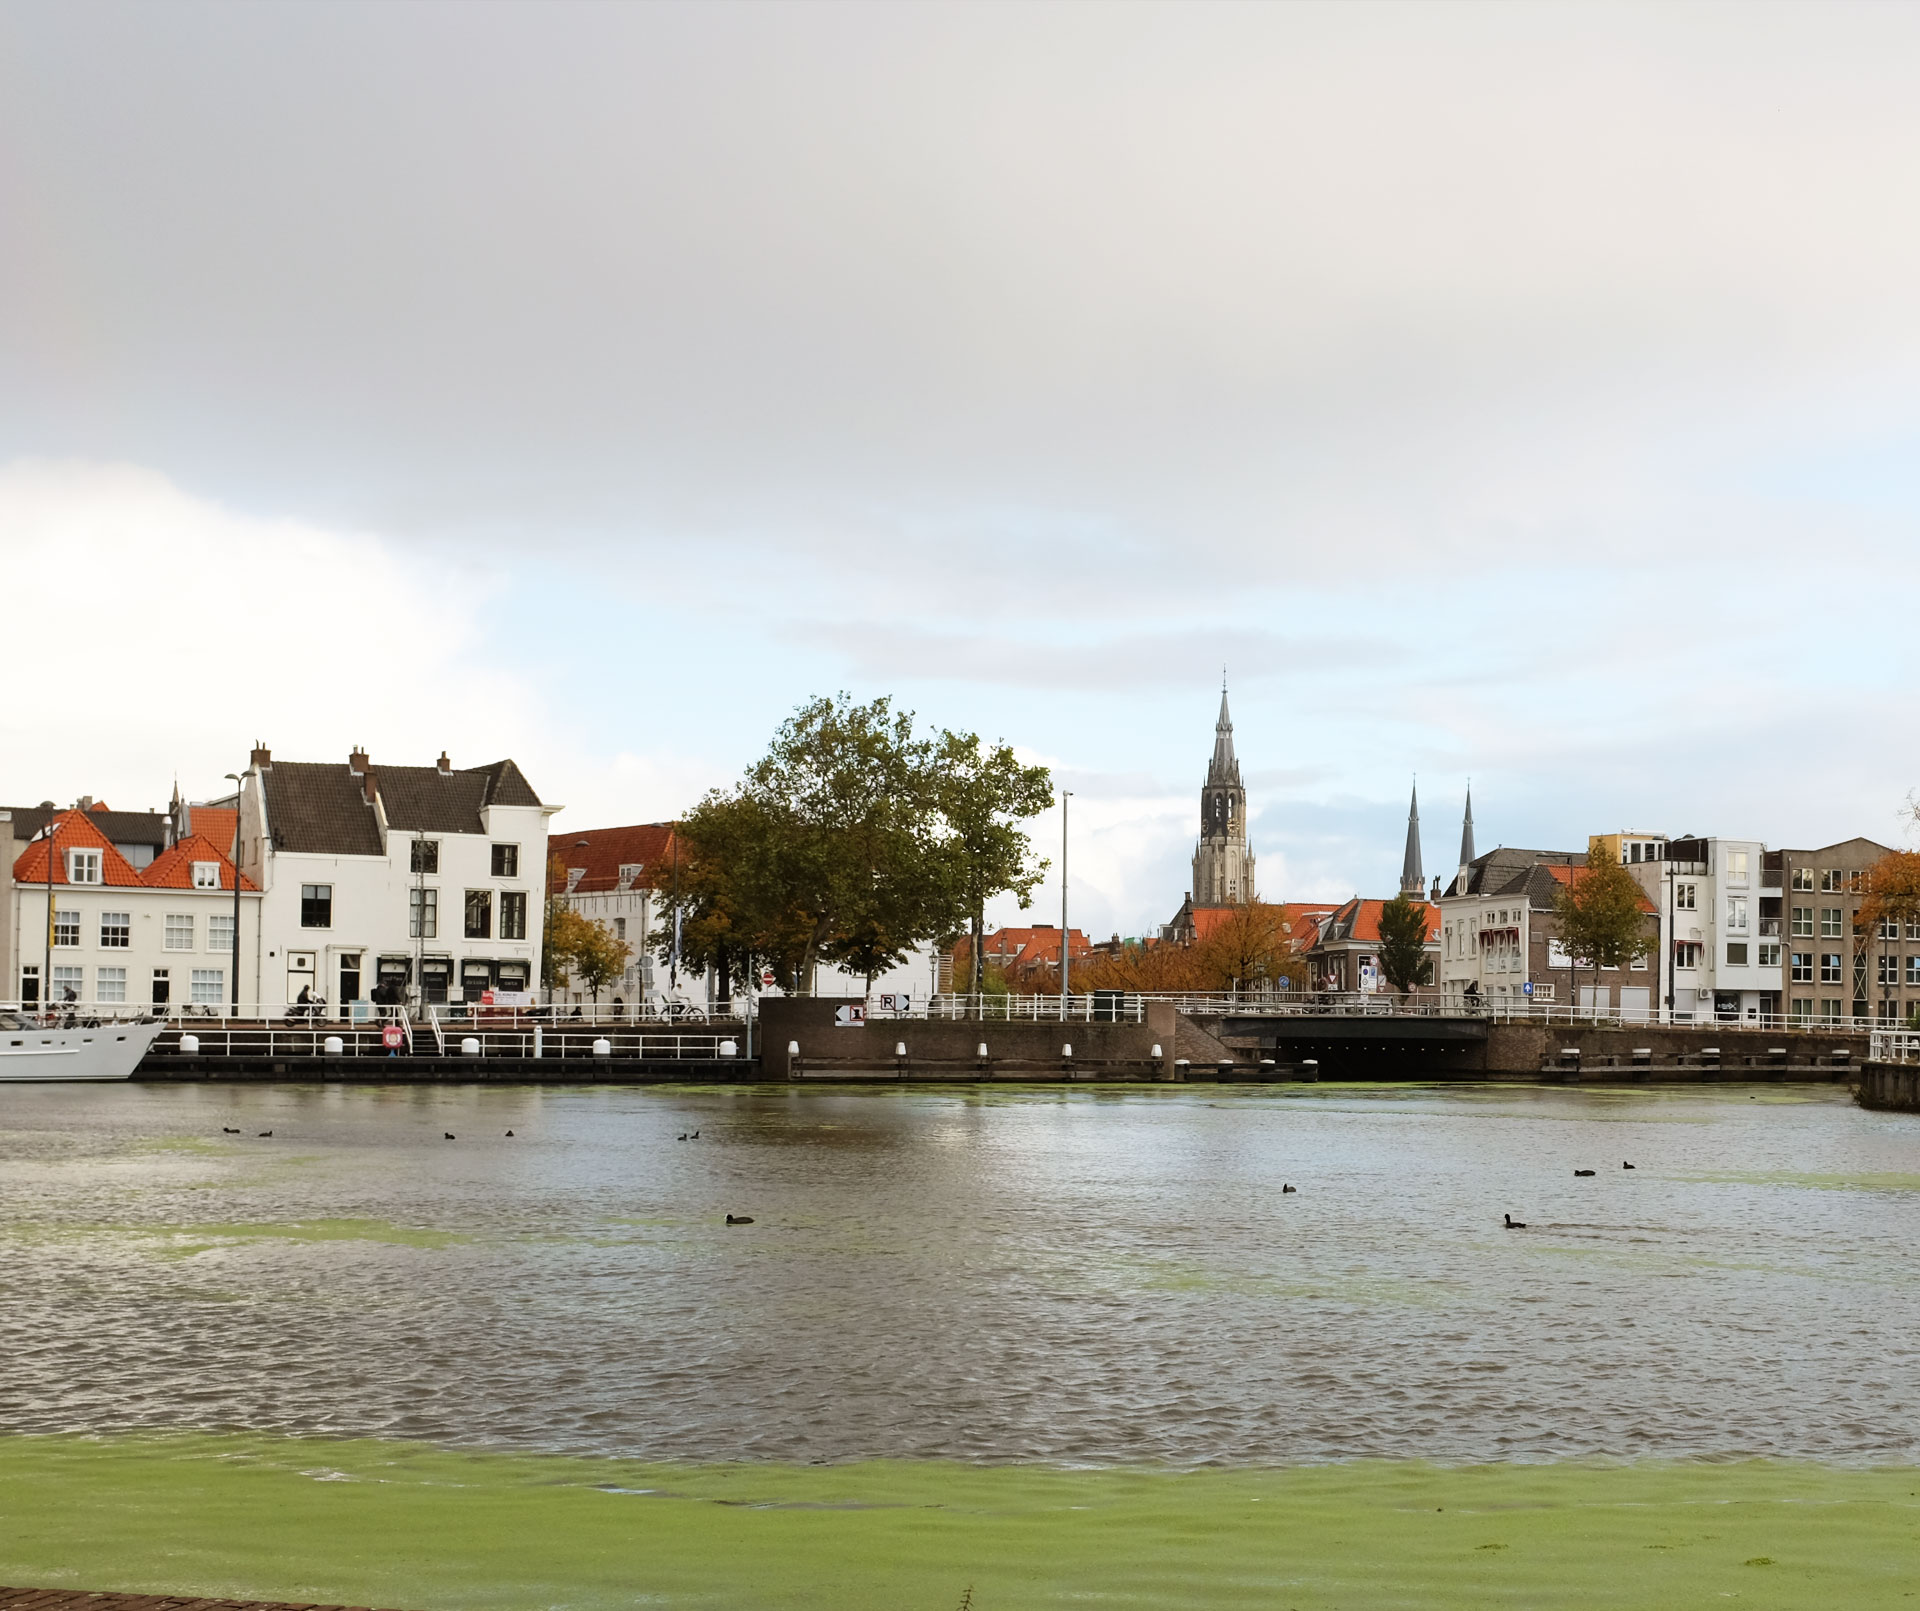 View of Delft painting location in modern day